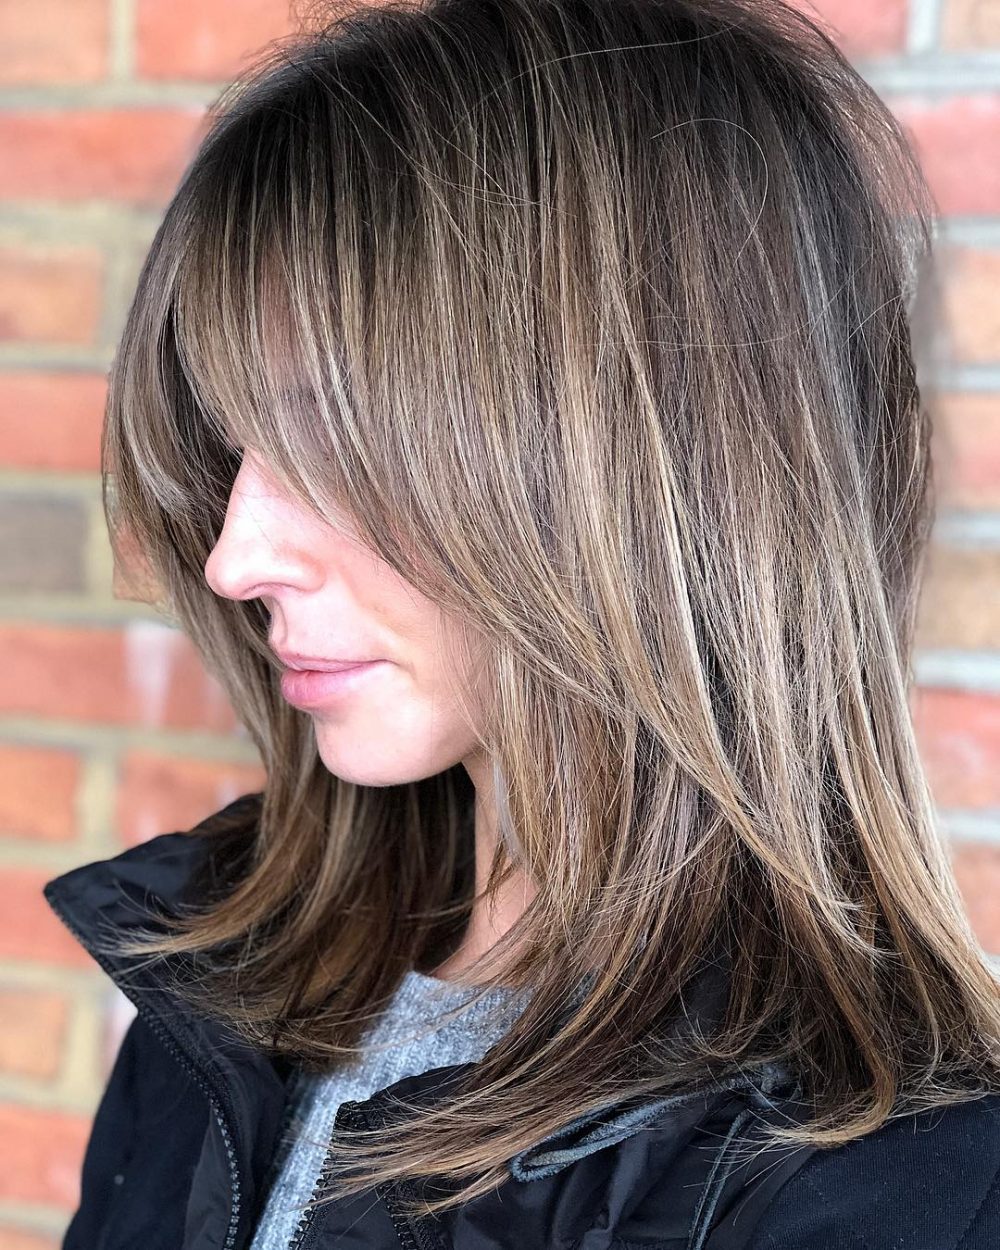 A polished bronde colored shag with bangs